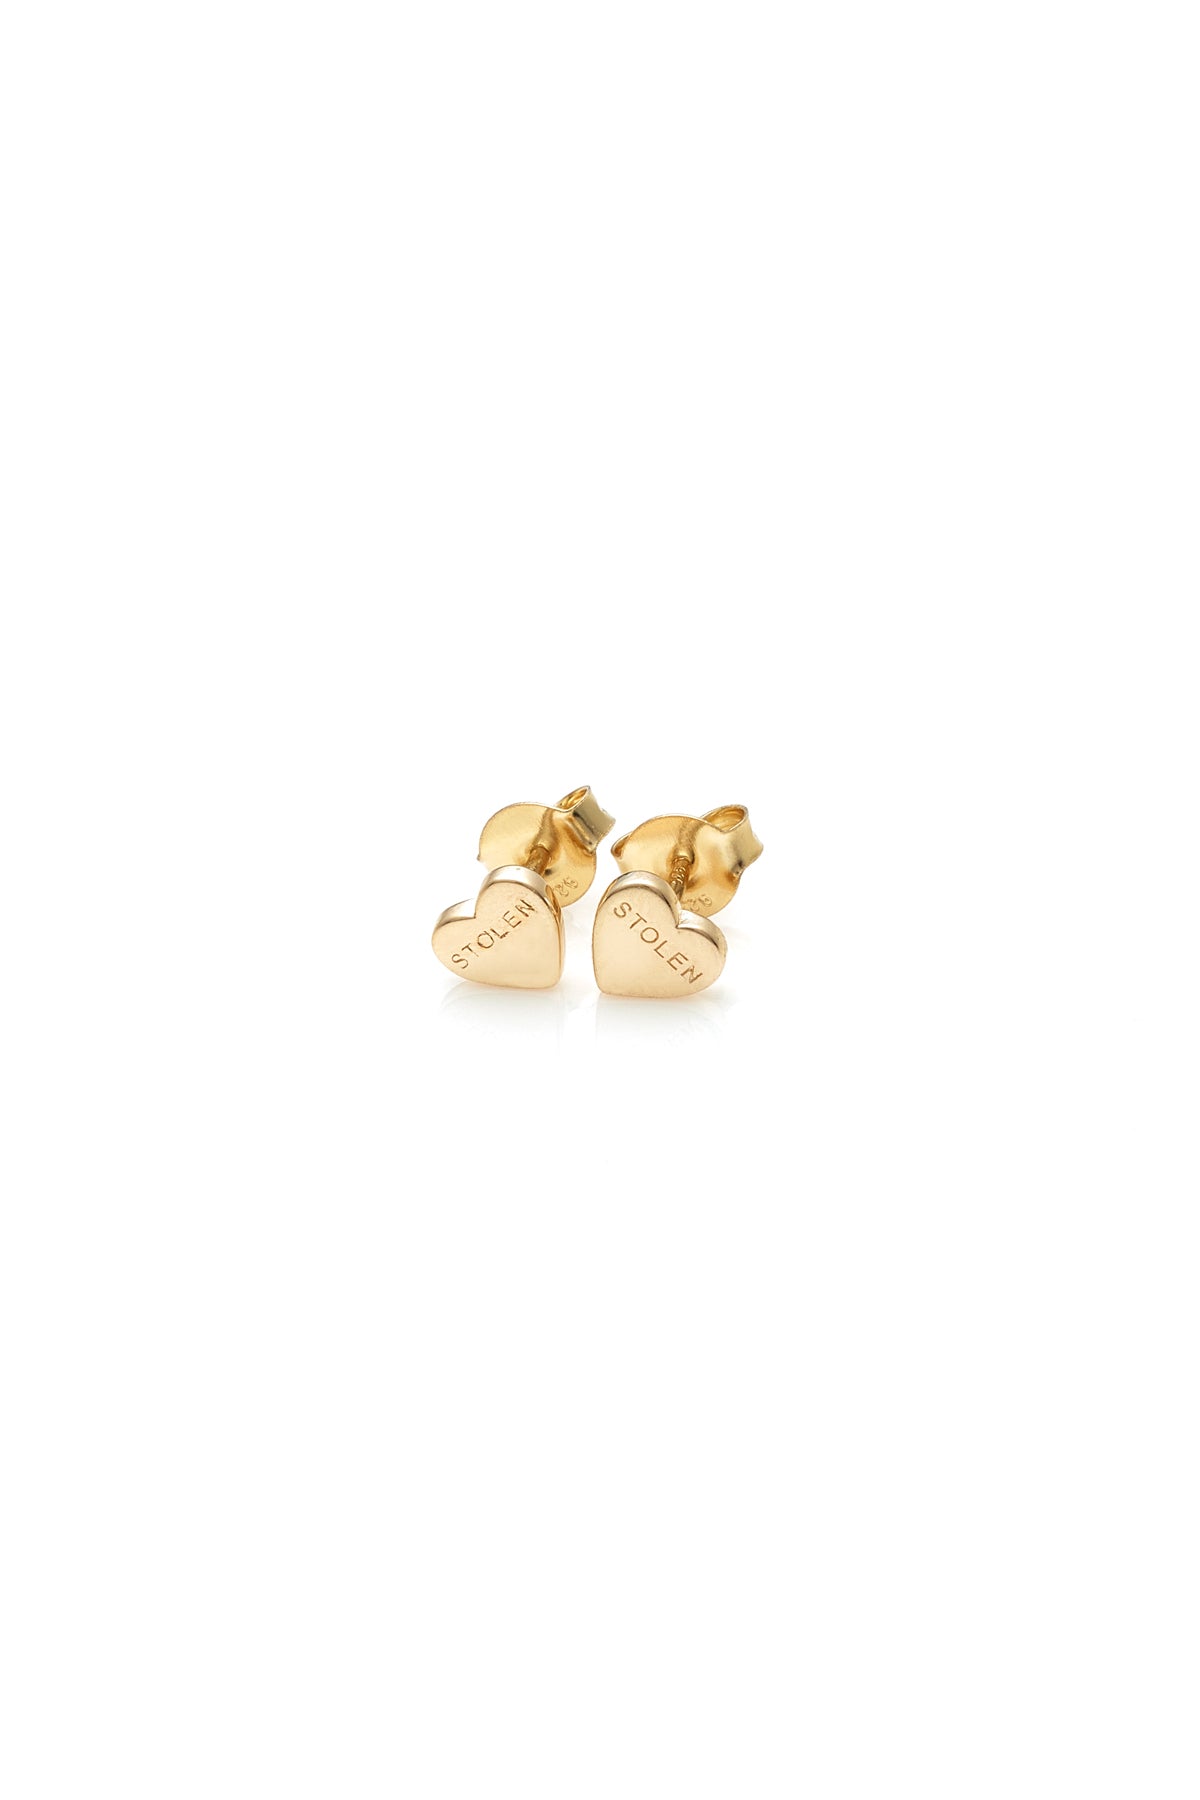 STOLEN GIRLFRIENDS CLUB STOLEN HEART EARRINGS  The Stolen Girlfriends Club Heart Earrings are cute mini heart studs, featuring the signature 'Stolen' Engraving on each heart, these little hearts are great for every day wear. Crafted using 18k gold plating pair these with other studs or wear alone.      Signature 'Stolen' Engraving on each heart     Sold as a pair      7mm x 6.5mm